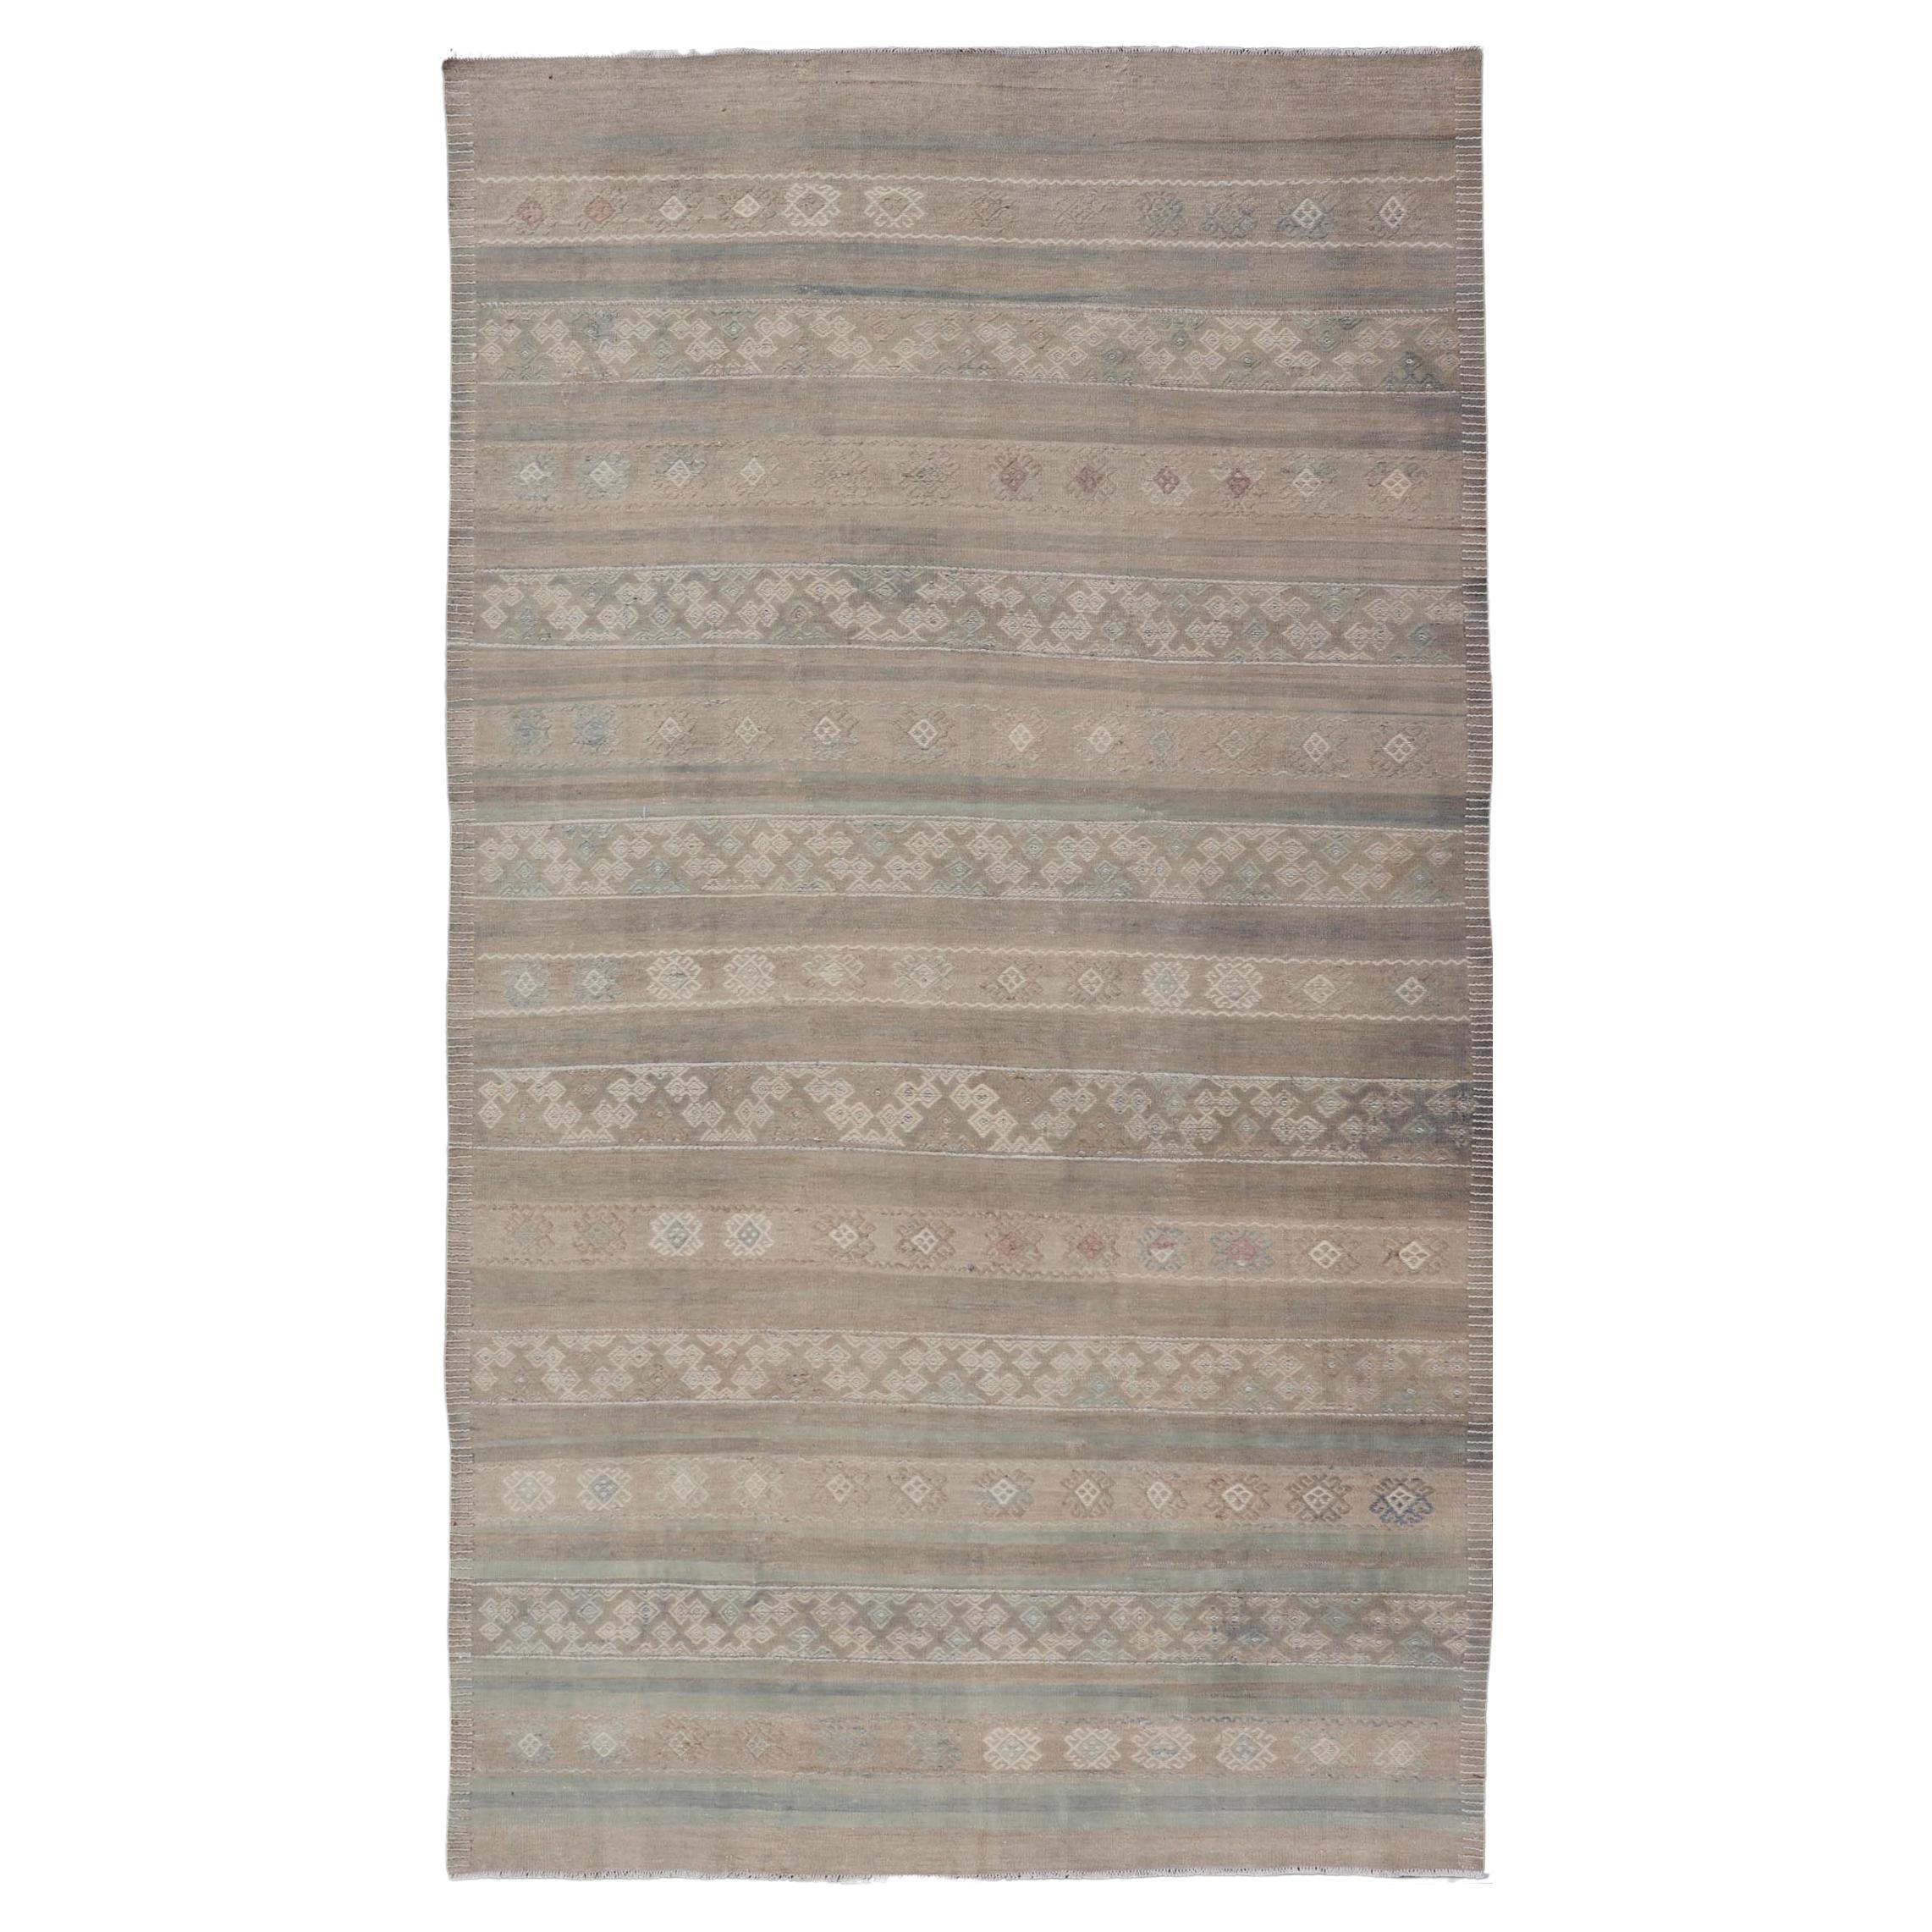 Vintage Turkish Kilim with Stripes in Taupe, Green, Tan, Cream and Brown